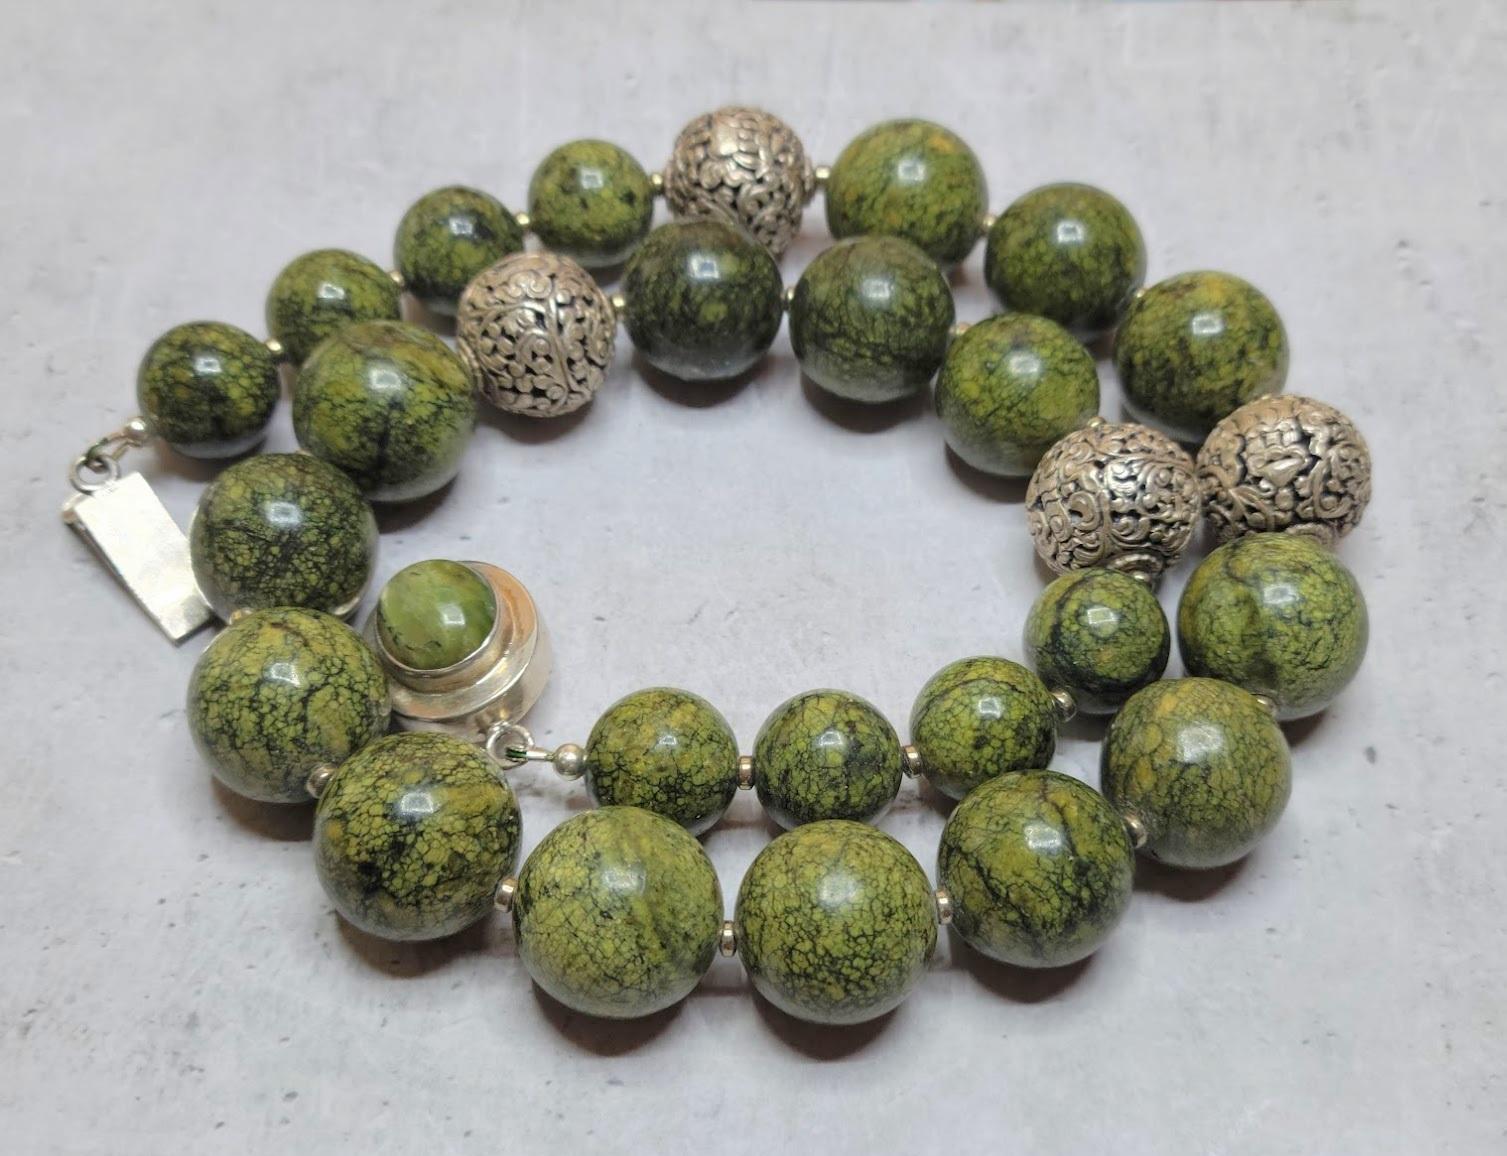 The length of the necklace is 20.5 inches (52 cm). The size of beads varies from 14 mm to 18 mm.
The color of the beads is a mix of various shades of green, light green, dark green, and yellow.
The color is authentic and natural. No thermal or other